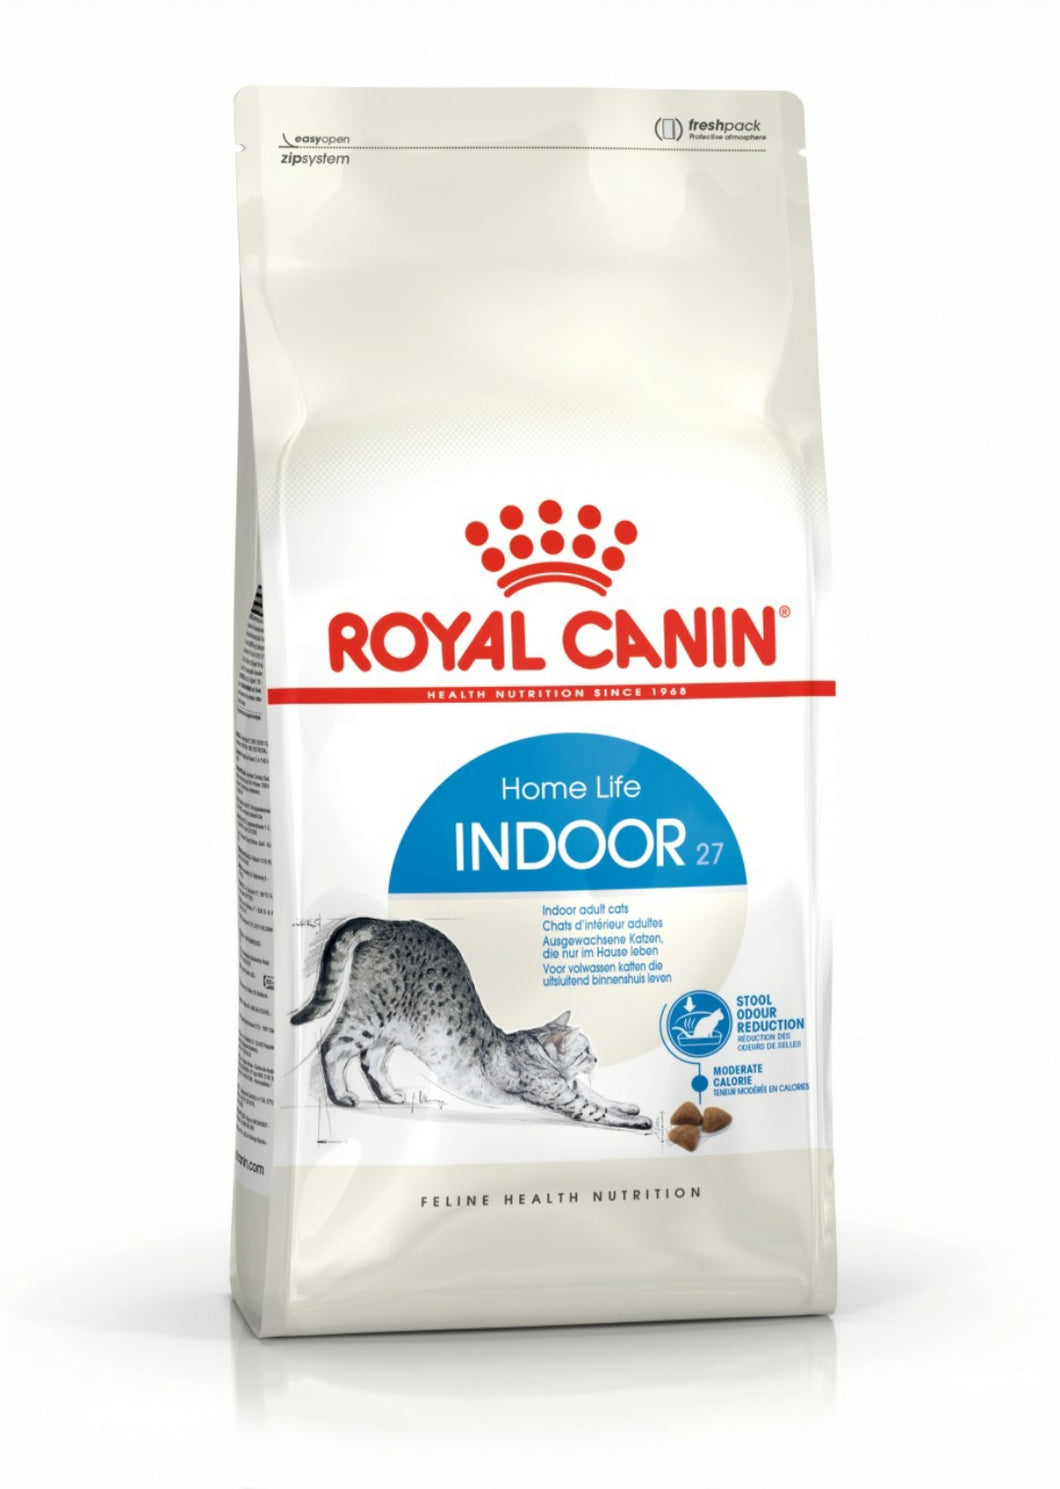 CAT FOOD ROYAL CANIN - CWS Caregiver Special (min purchase 2 x 10kg)